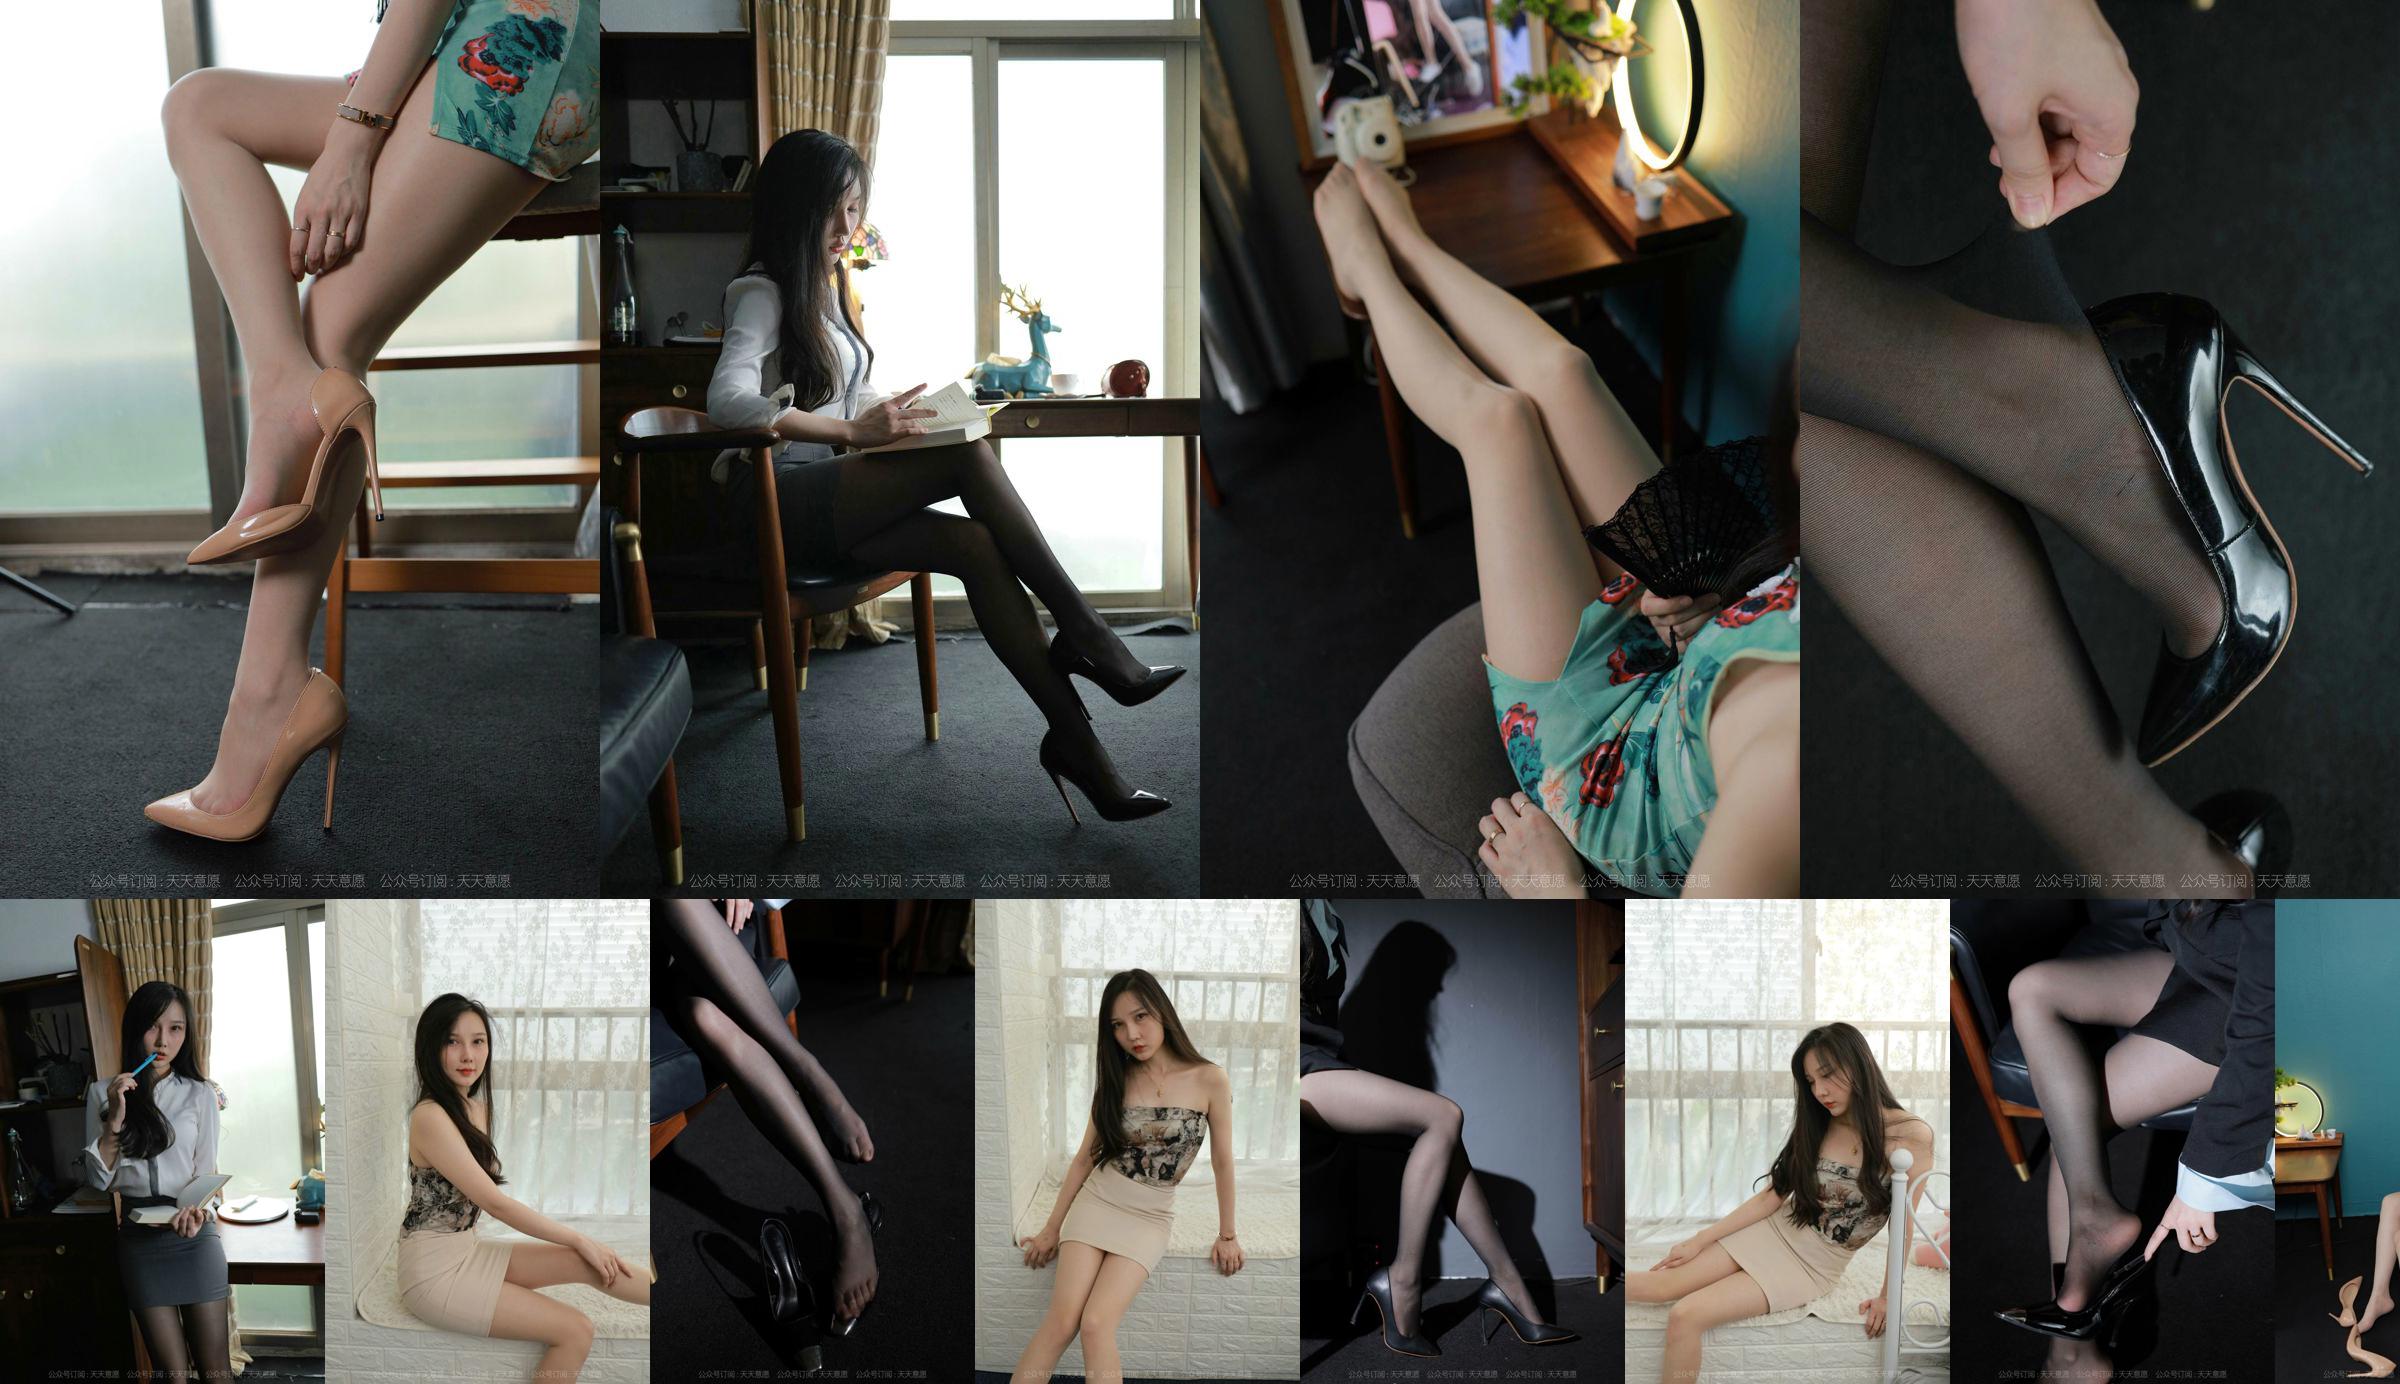 [IESS 奇思趣向] Model: Wen Xin "Sky Blue and Other Misty Rain" No.e1bb7b Page 3